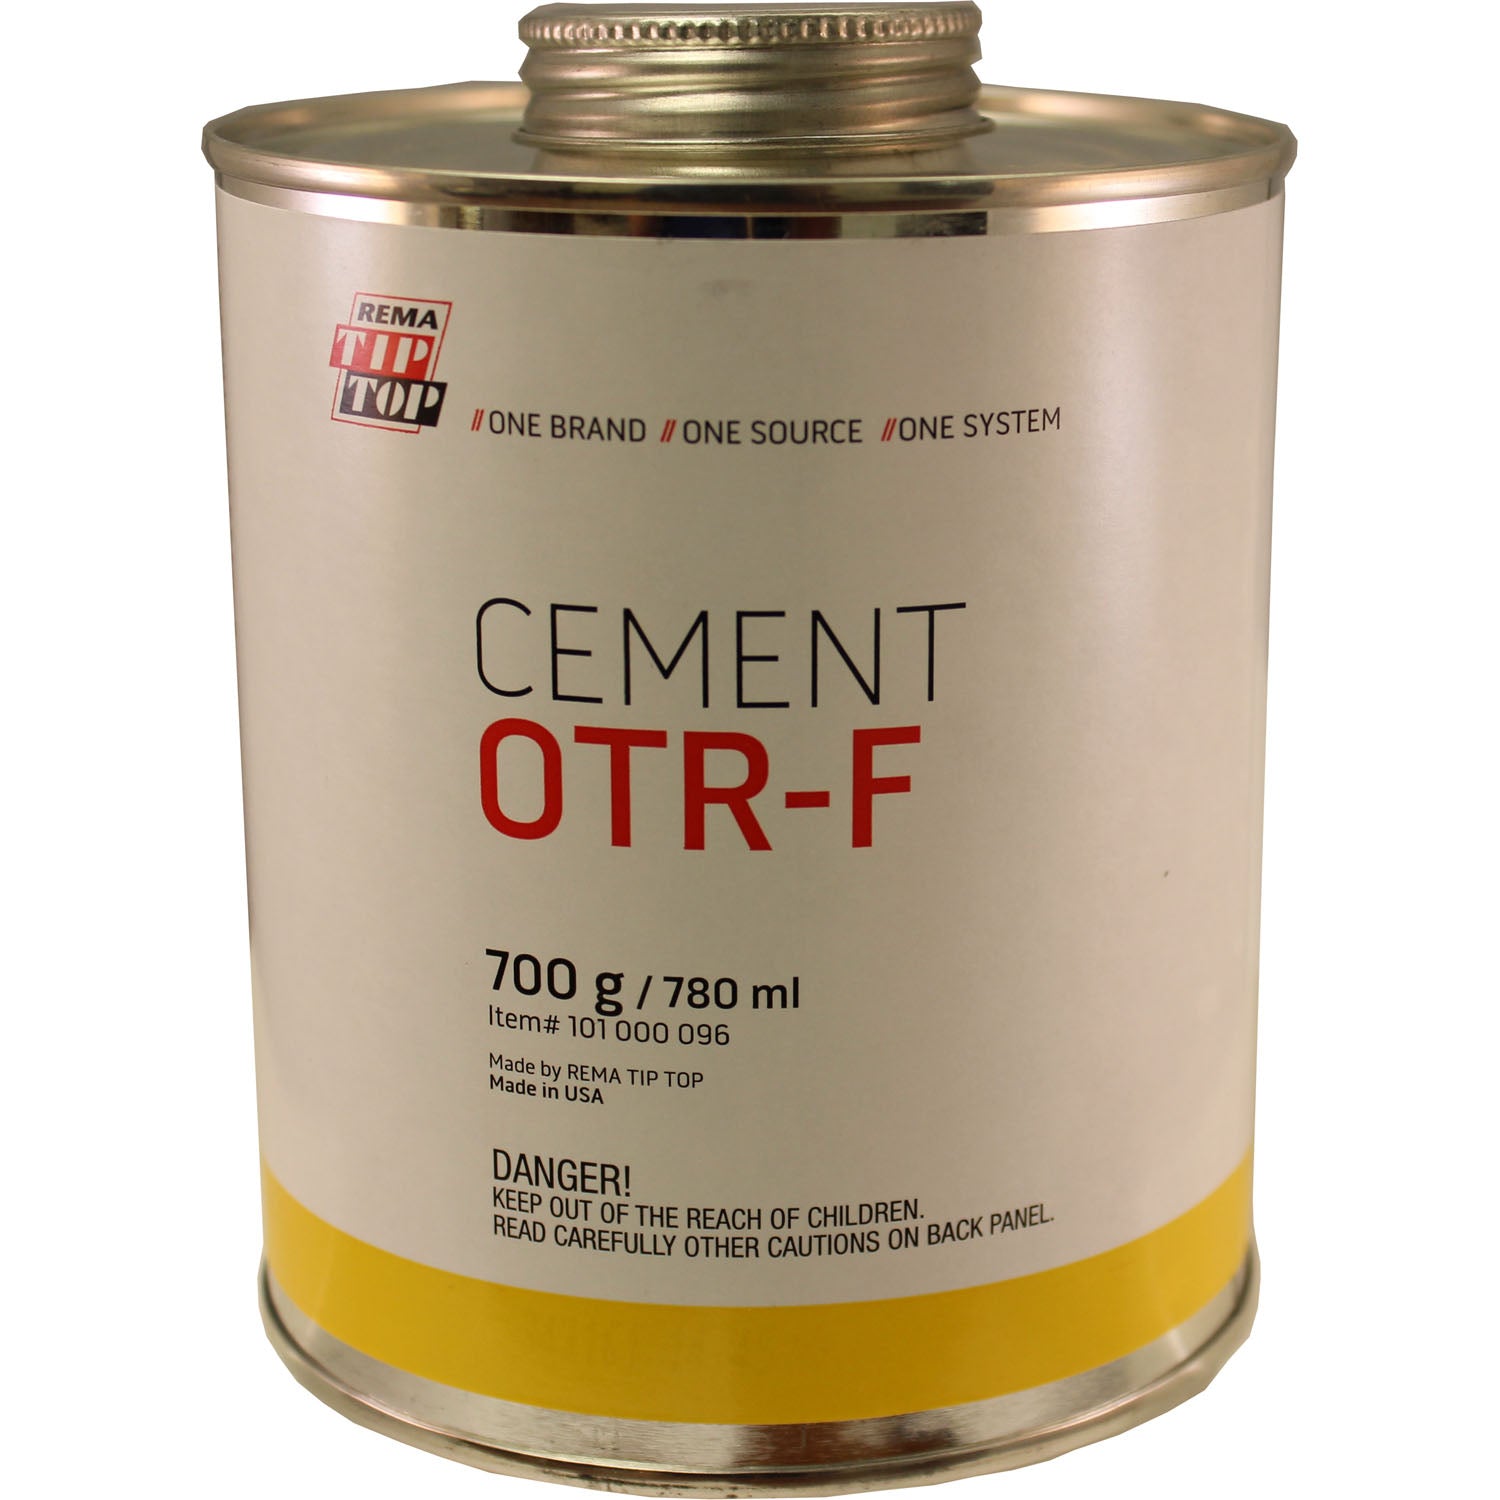 REMA TIP TOP OTR-F Special Cement 700g / 780ml